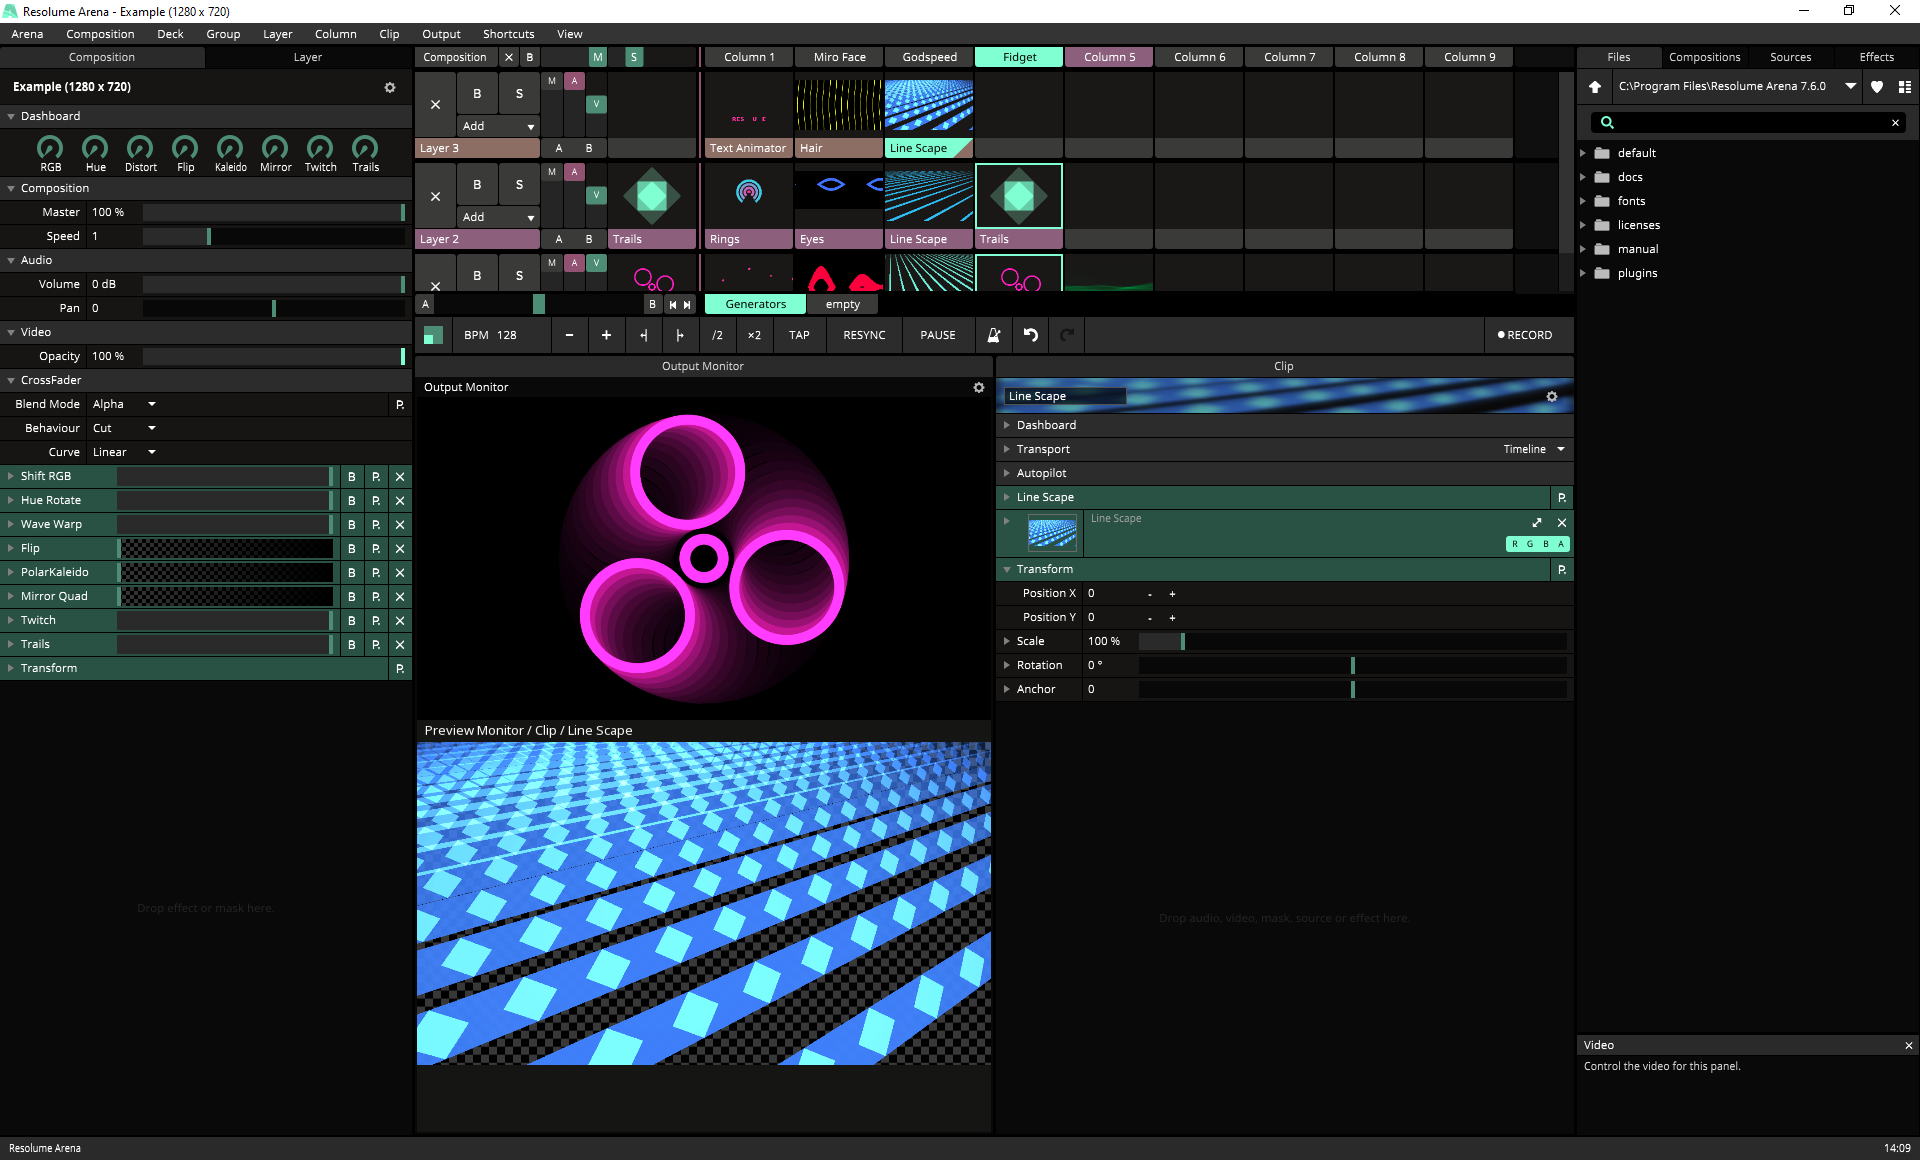 Working with Resolume Arena 7.19.0 full